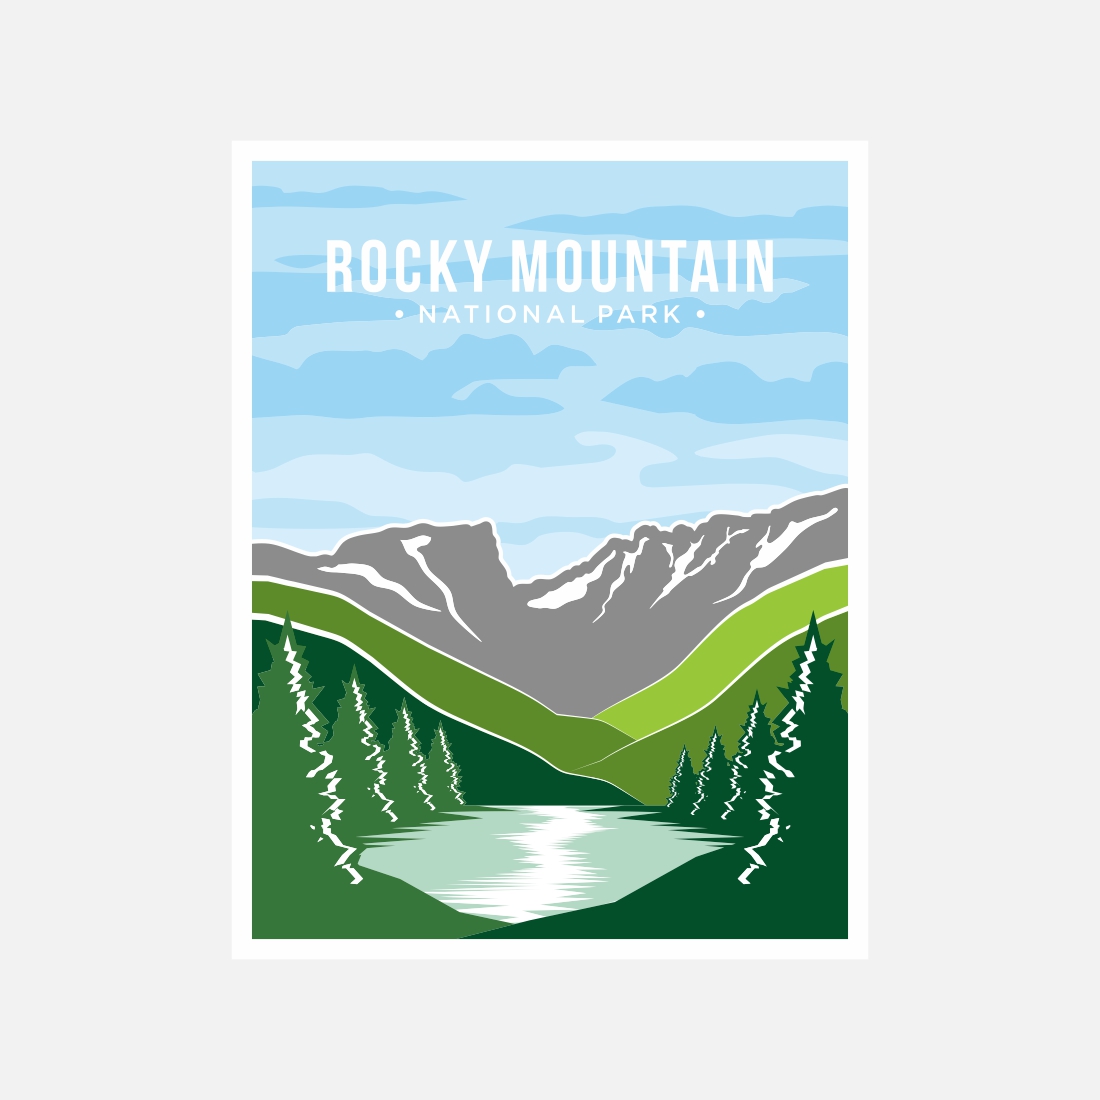 Rocky Mountain National Park Poster Vector Illustration – Only $8 cover image.